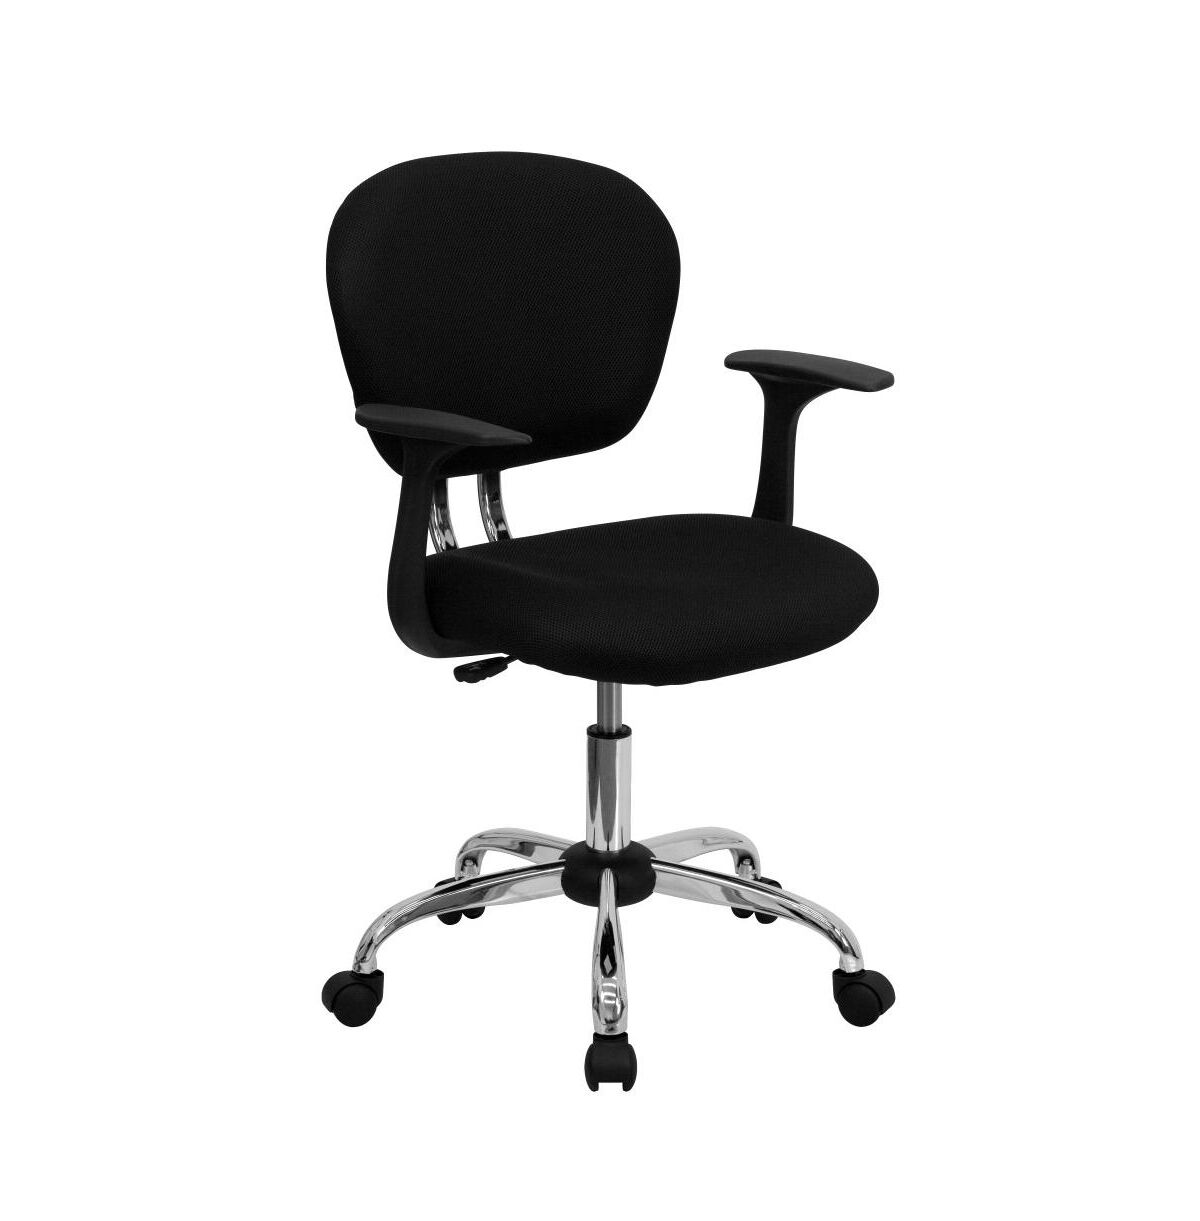 Emma+oliver Mid-Back Mesh Padded Swivel Task Office Chair With Chrome Base And Arms - Black